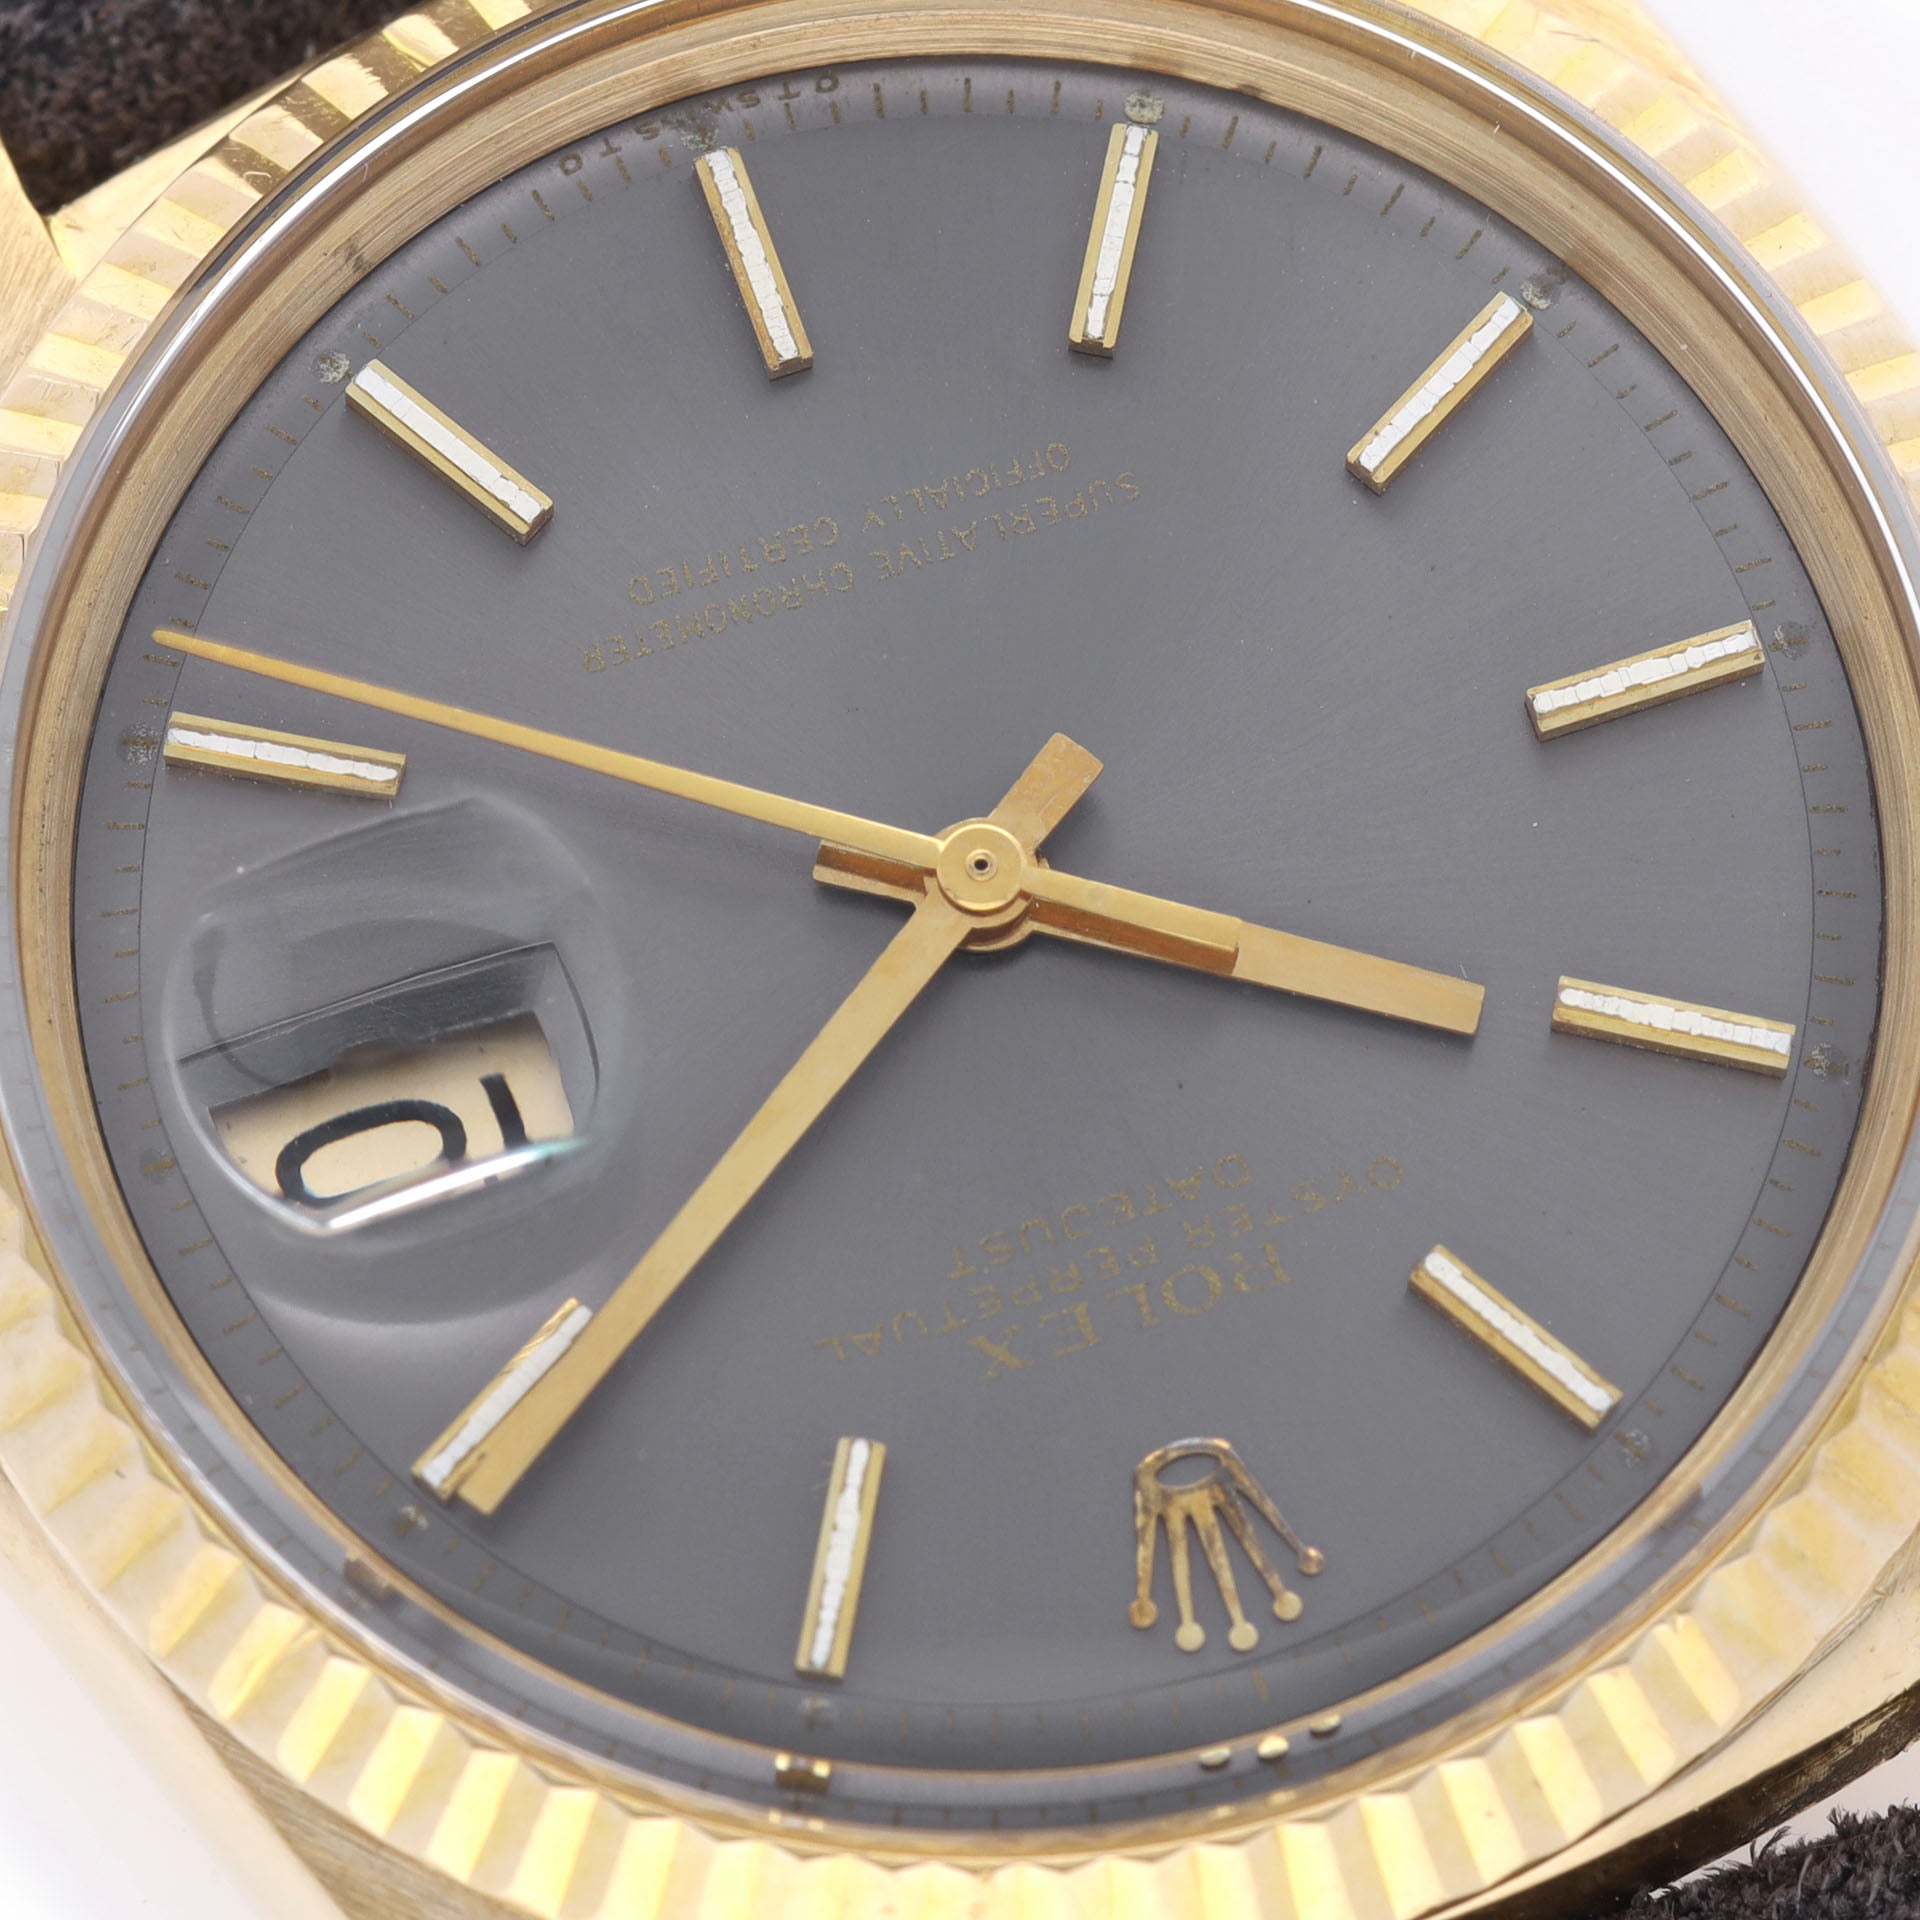 Rolex Datejust 1601 Yellow Gold with Grey Soleil Sigma Dial